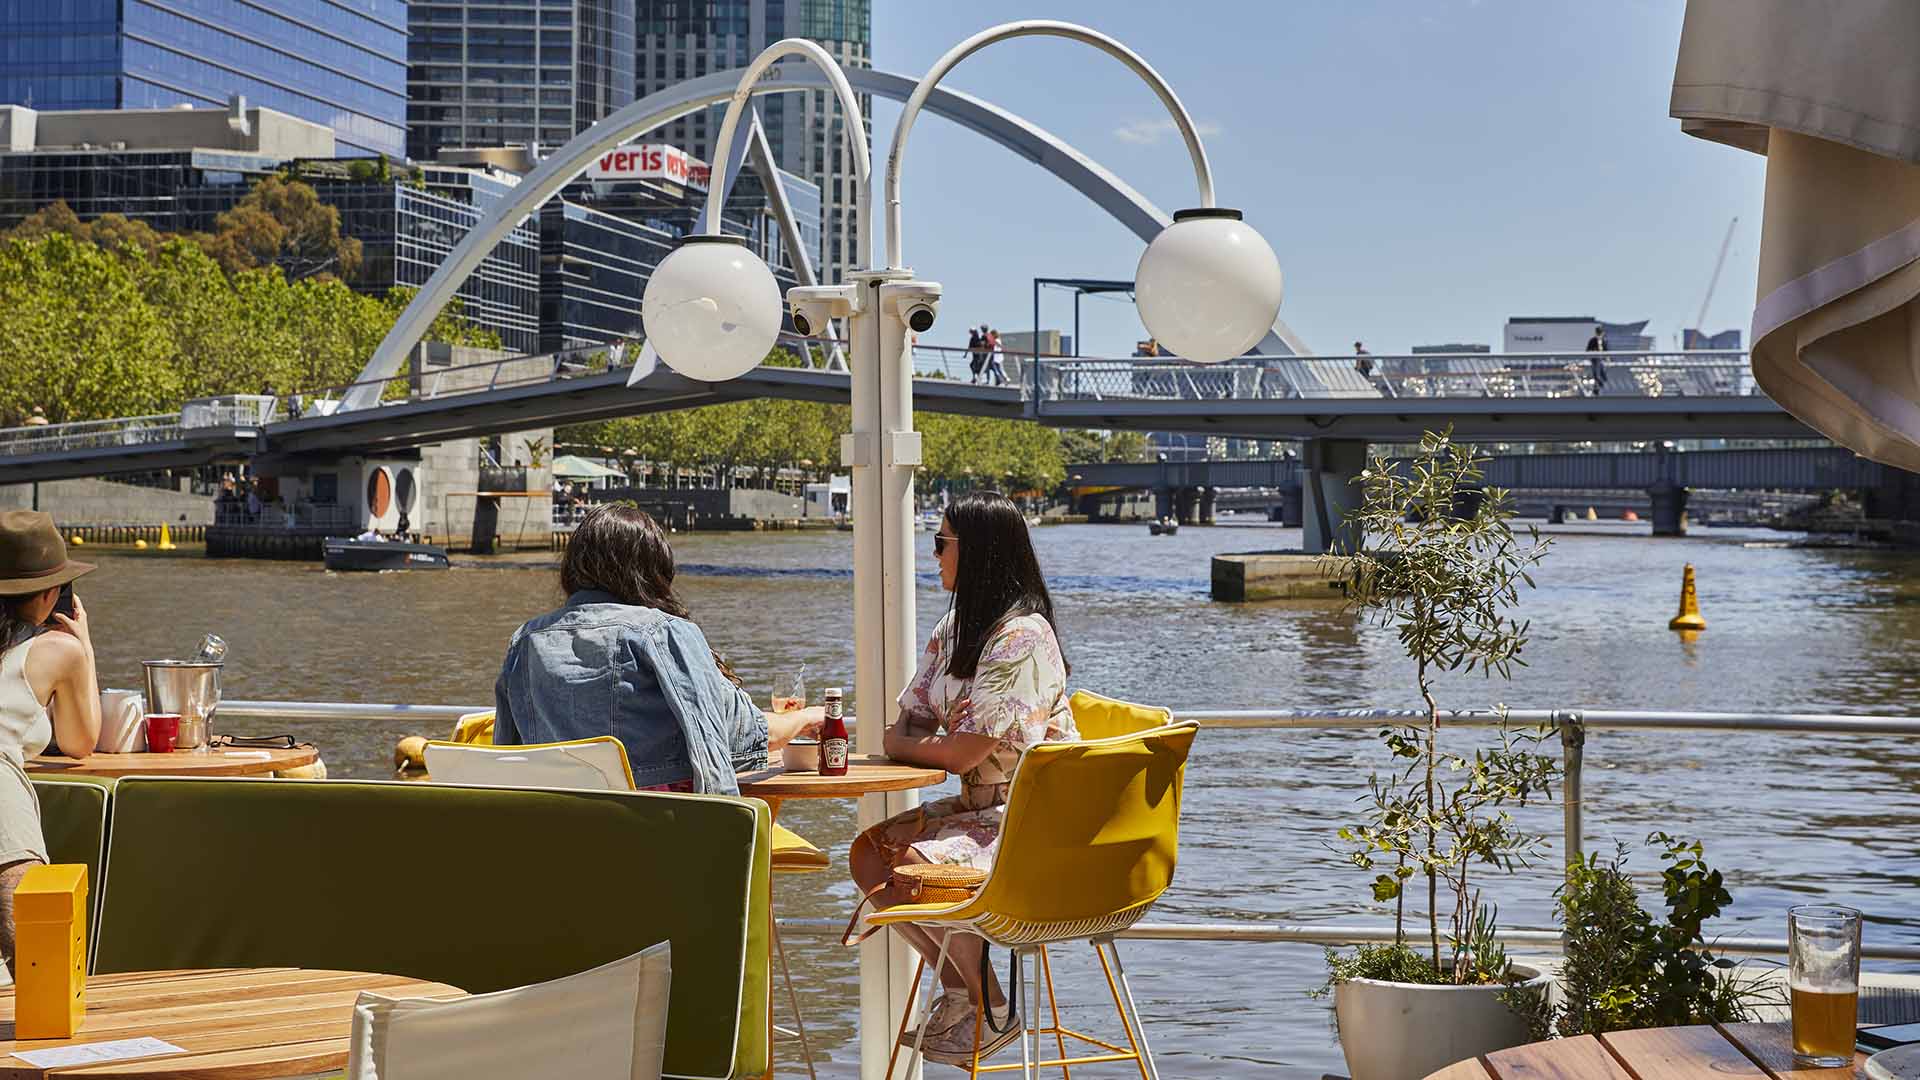 Six Melbourne Venues to Visit When All You Want to Do Is Sip a Spritz in the Sunshine